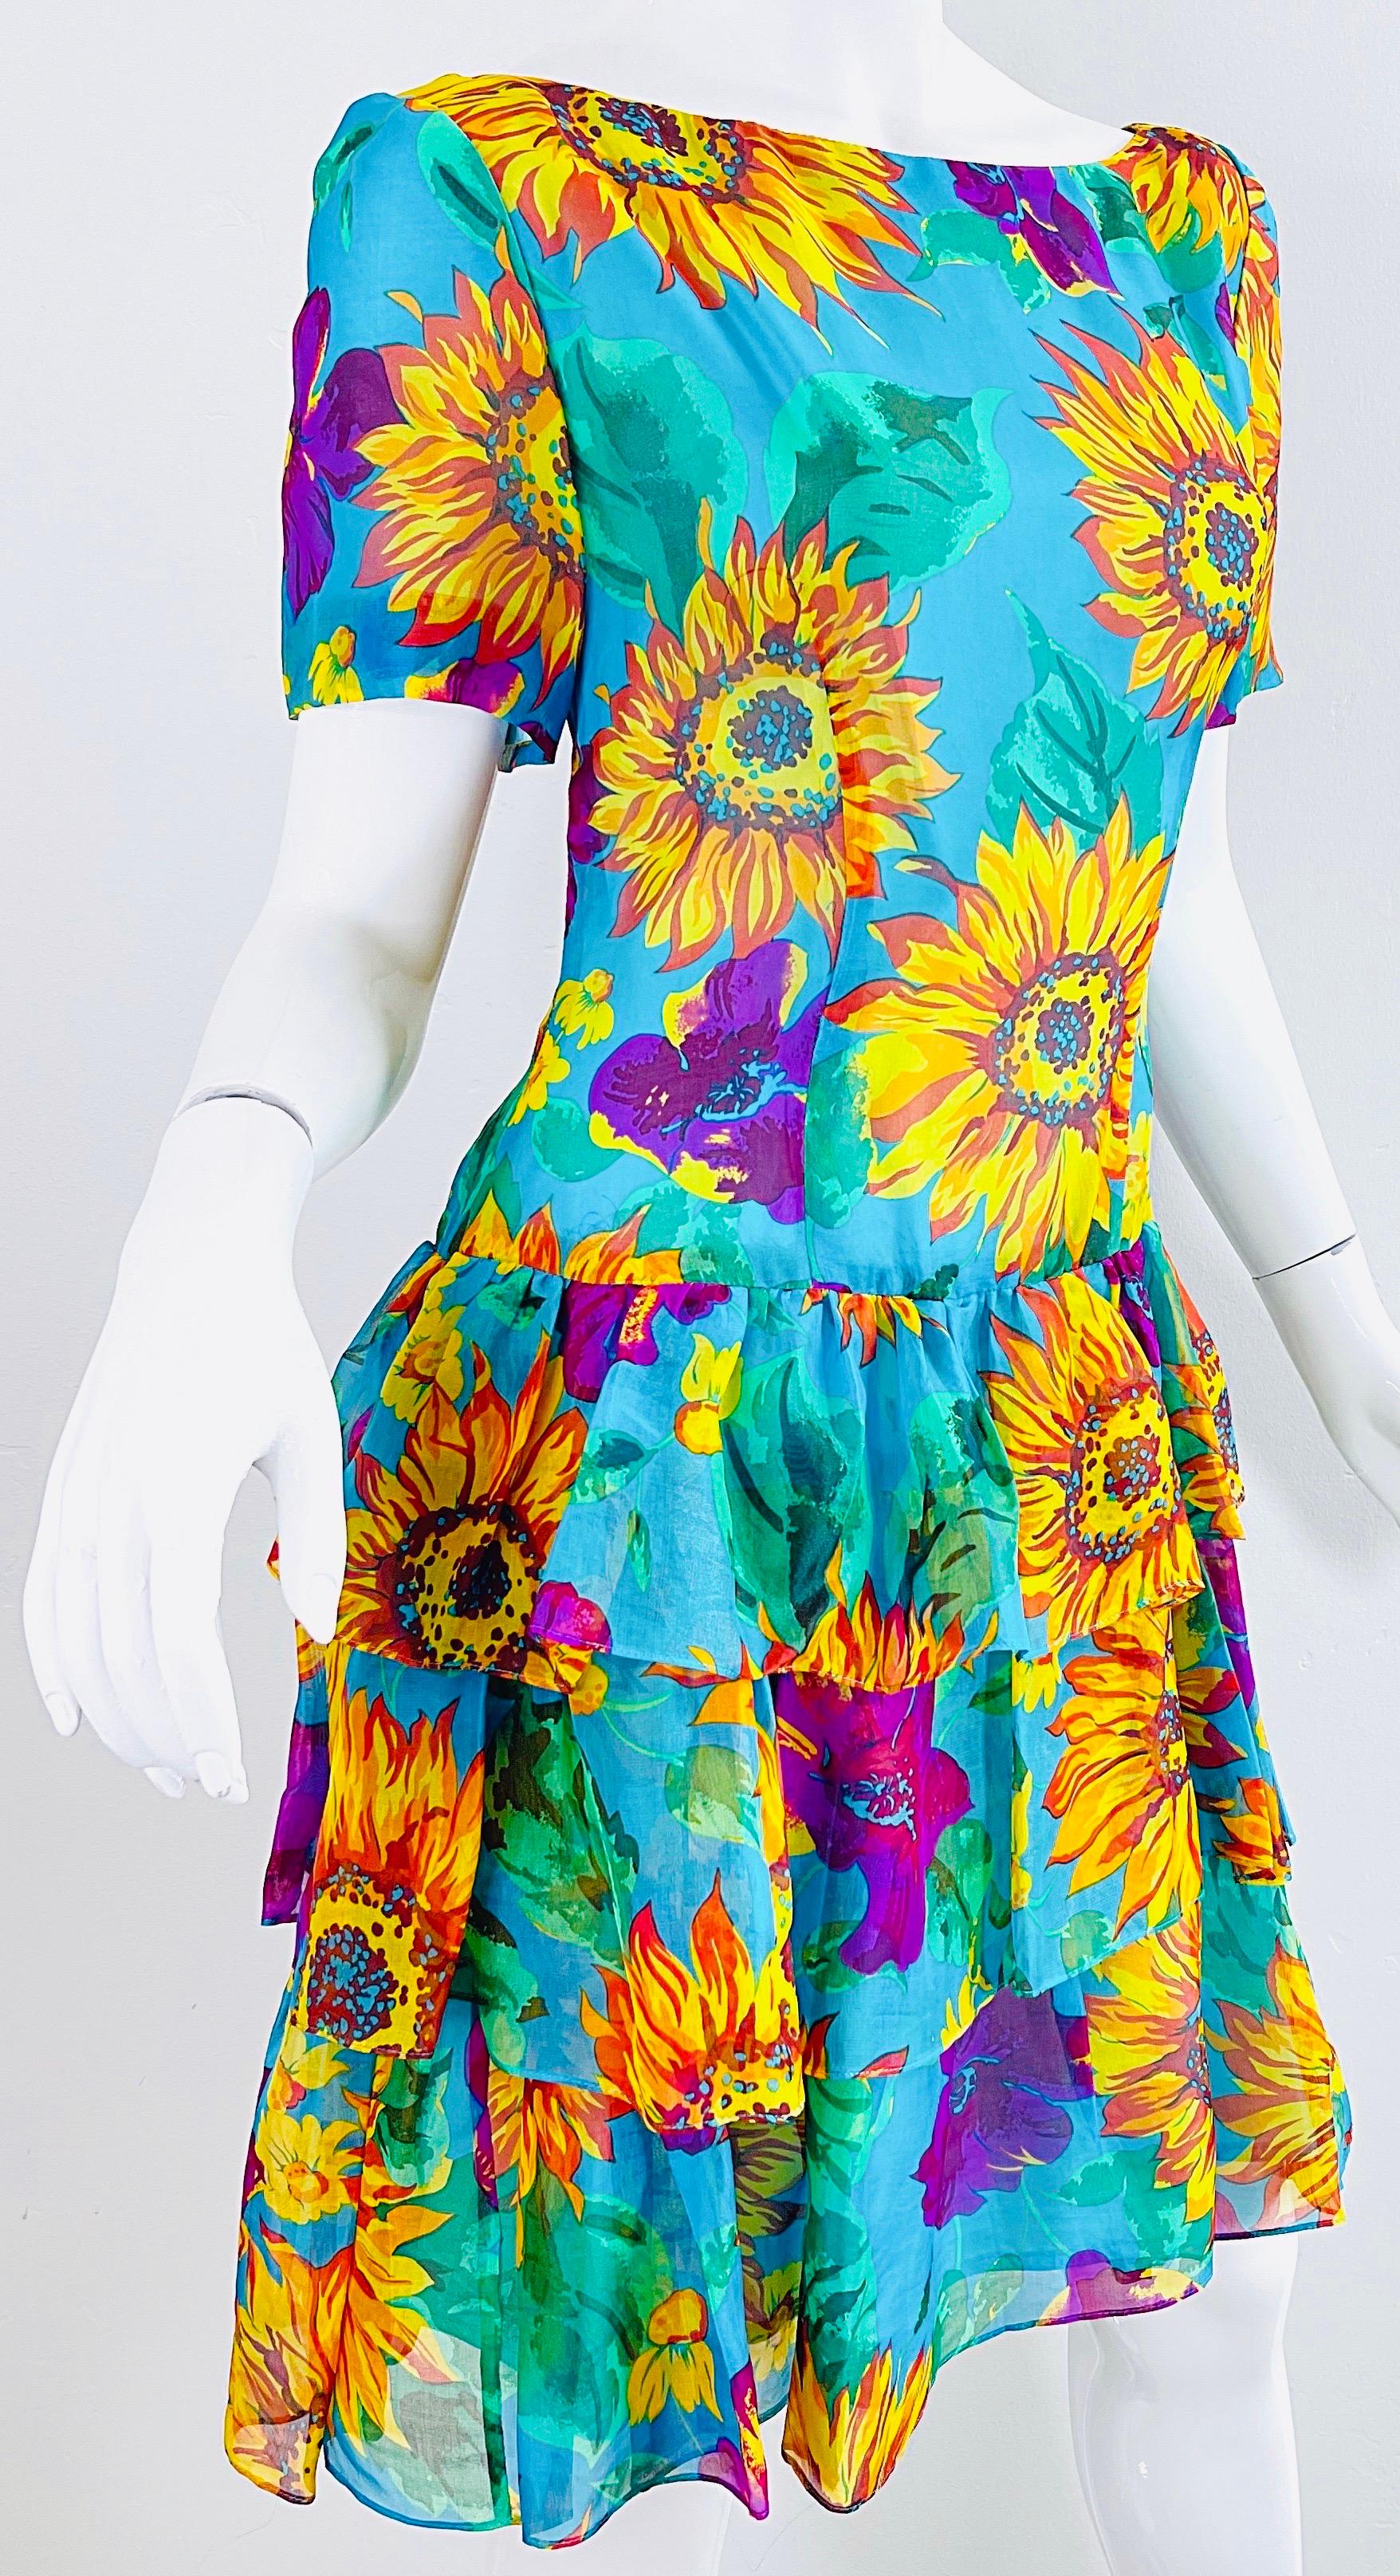 Chic 1980s Silk Chiffon Size 8 / 10 Sunflower Print Turquoise Vintage 80s Dress For Sale 5